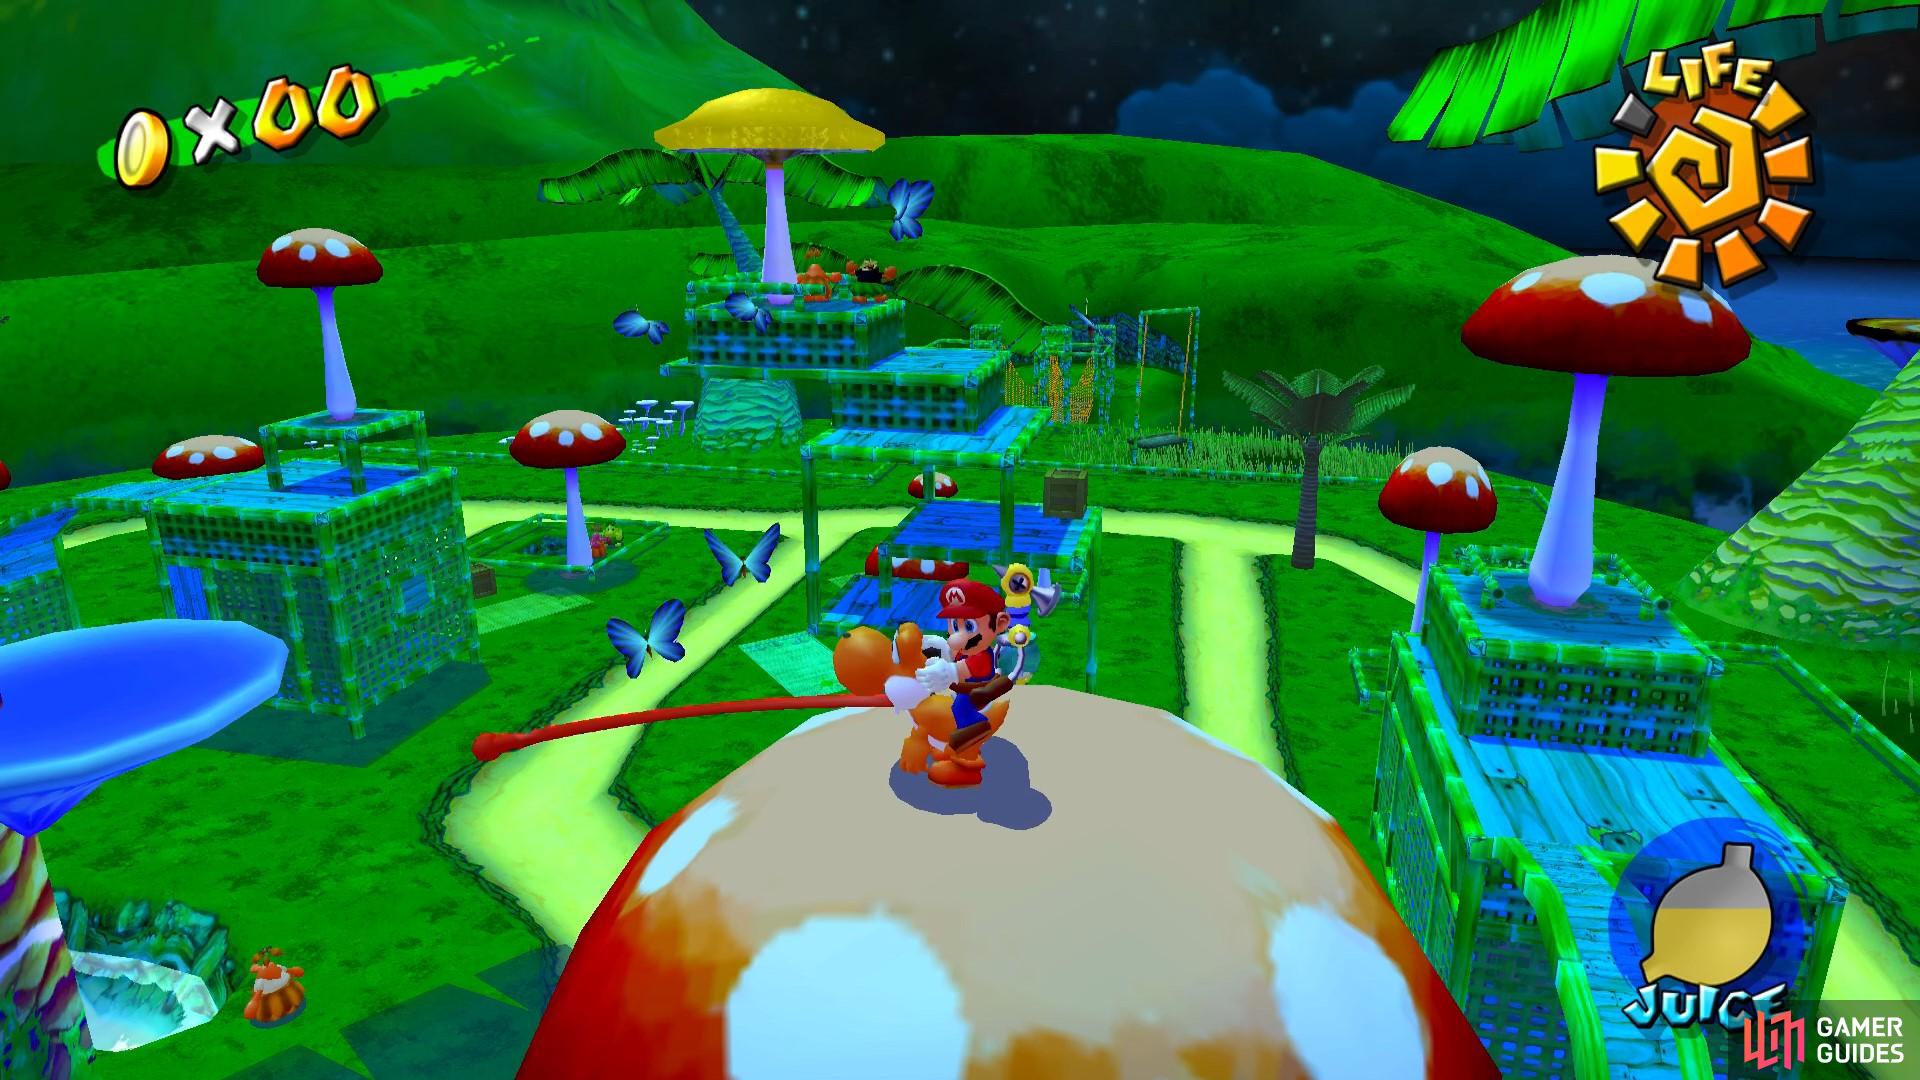 Hop up onto the fruit tree, then onto the toadstool nearby to get Yoshi to eat all of the blue butterflies and spawn in Blue Coin #19.